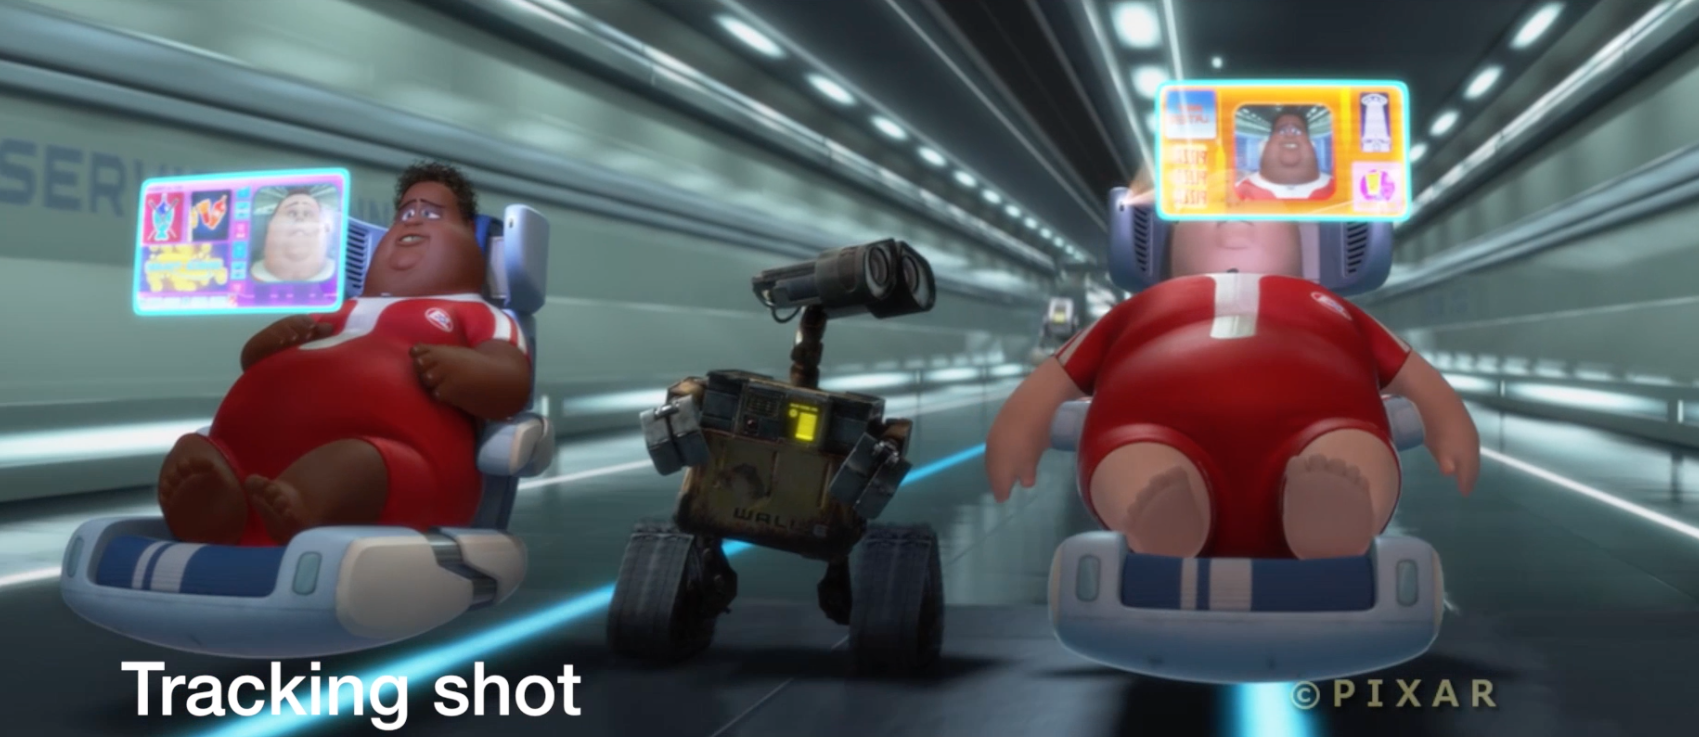 Tracking shot from Wall-E.